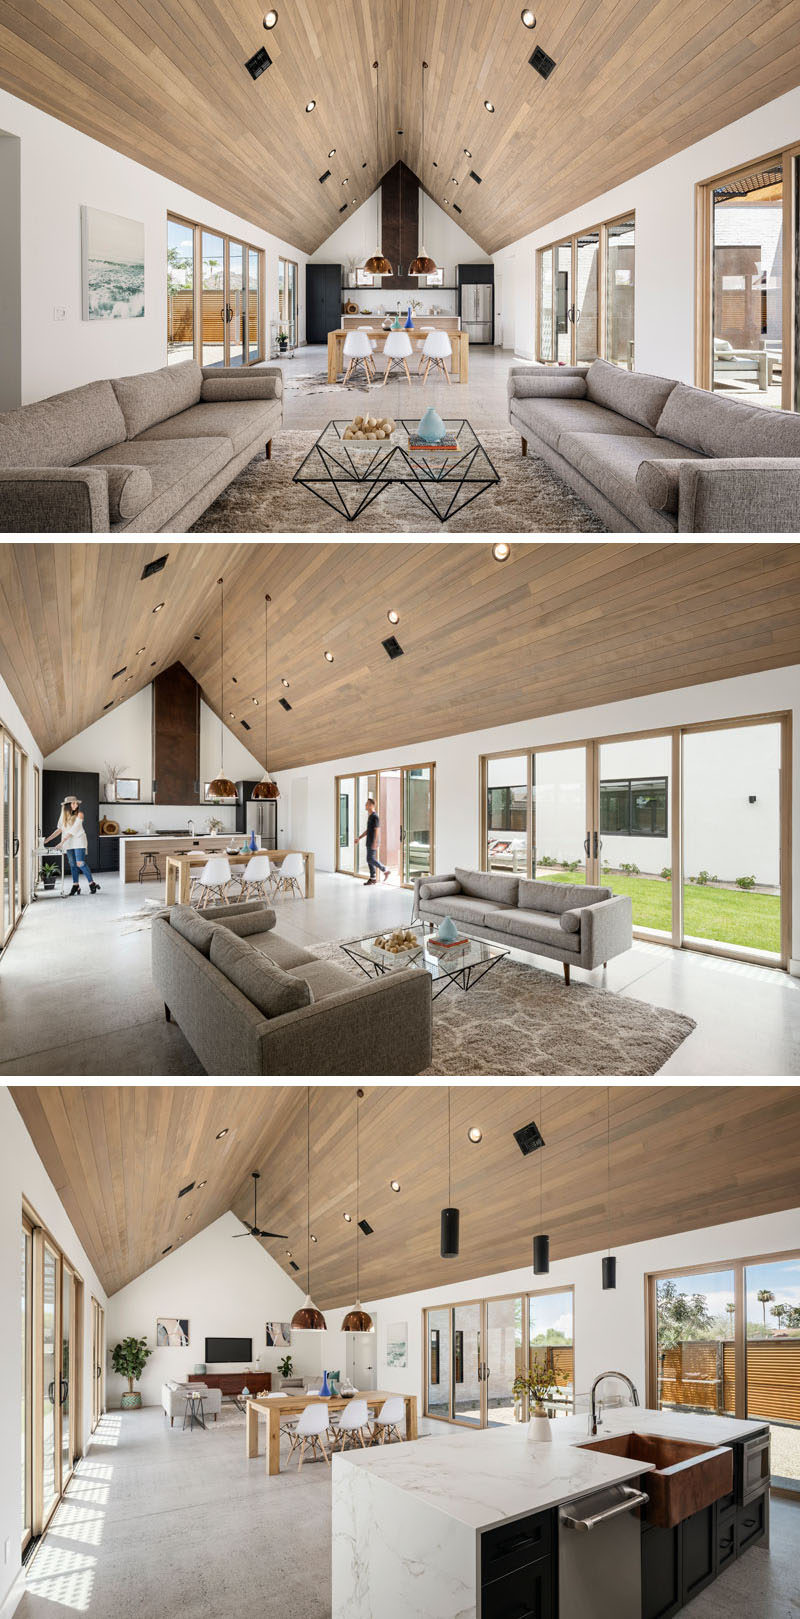 Inside this modernhouse, a large vaulted, tongue and groove hemlock ceiling stands out from the white walls, while the open and spacious room is home to the living room, dining area and kitchen. #ModernInterior #VaultedCeiling #GreatRoom